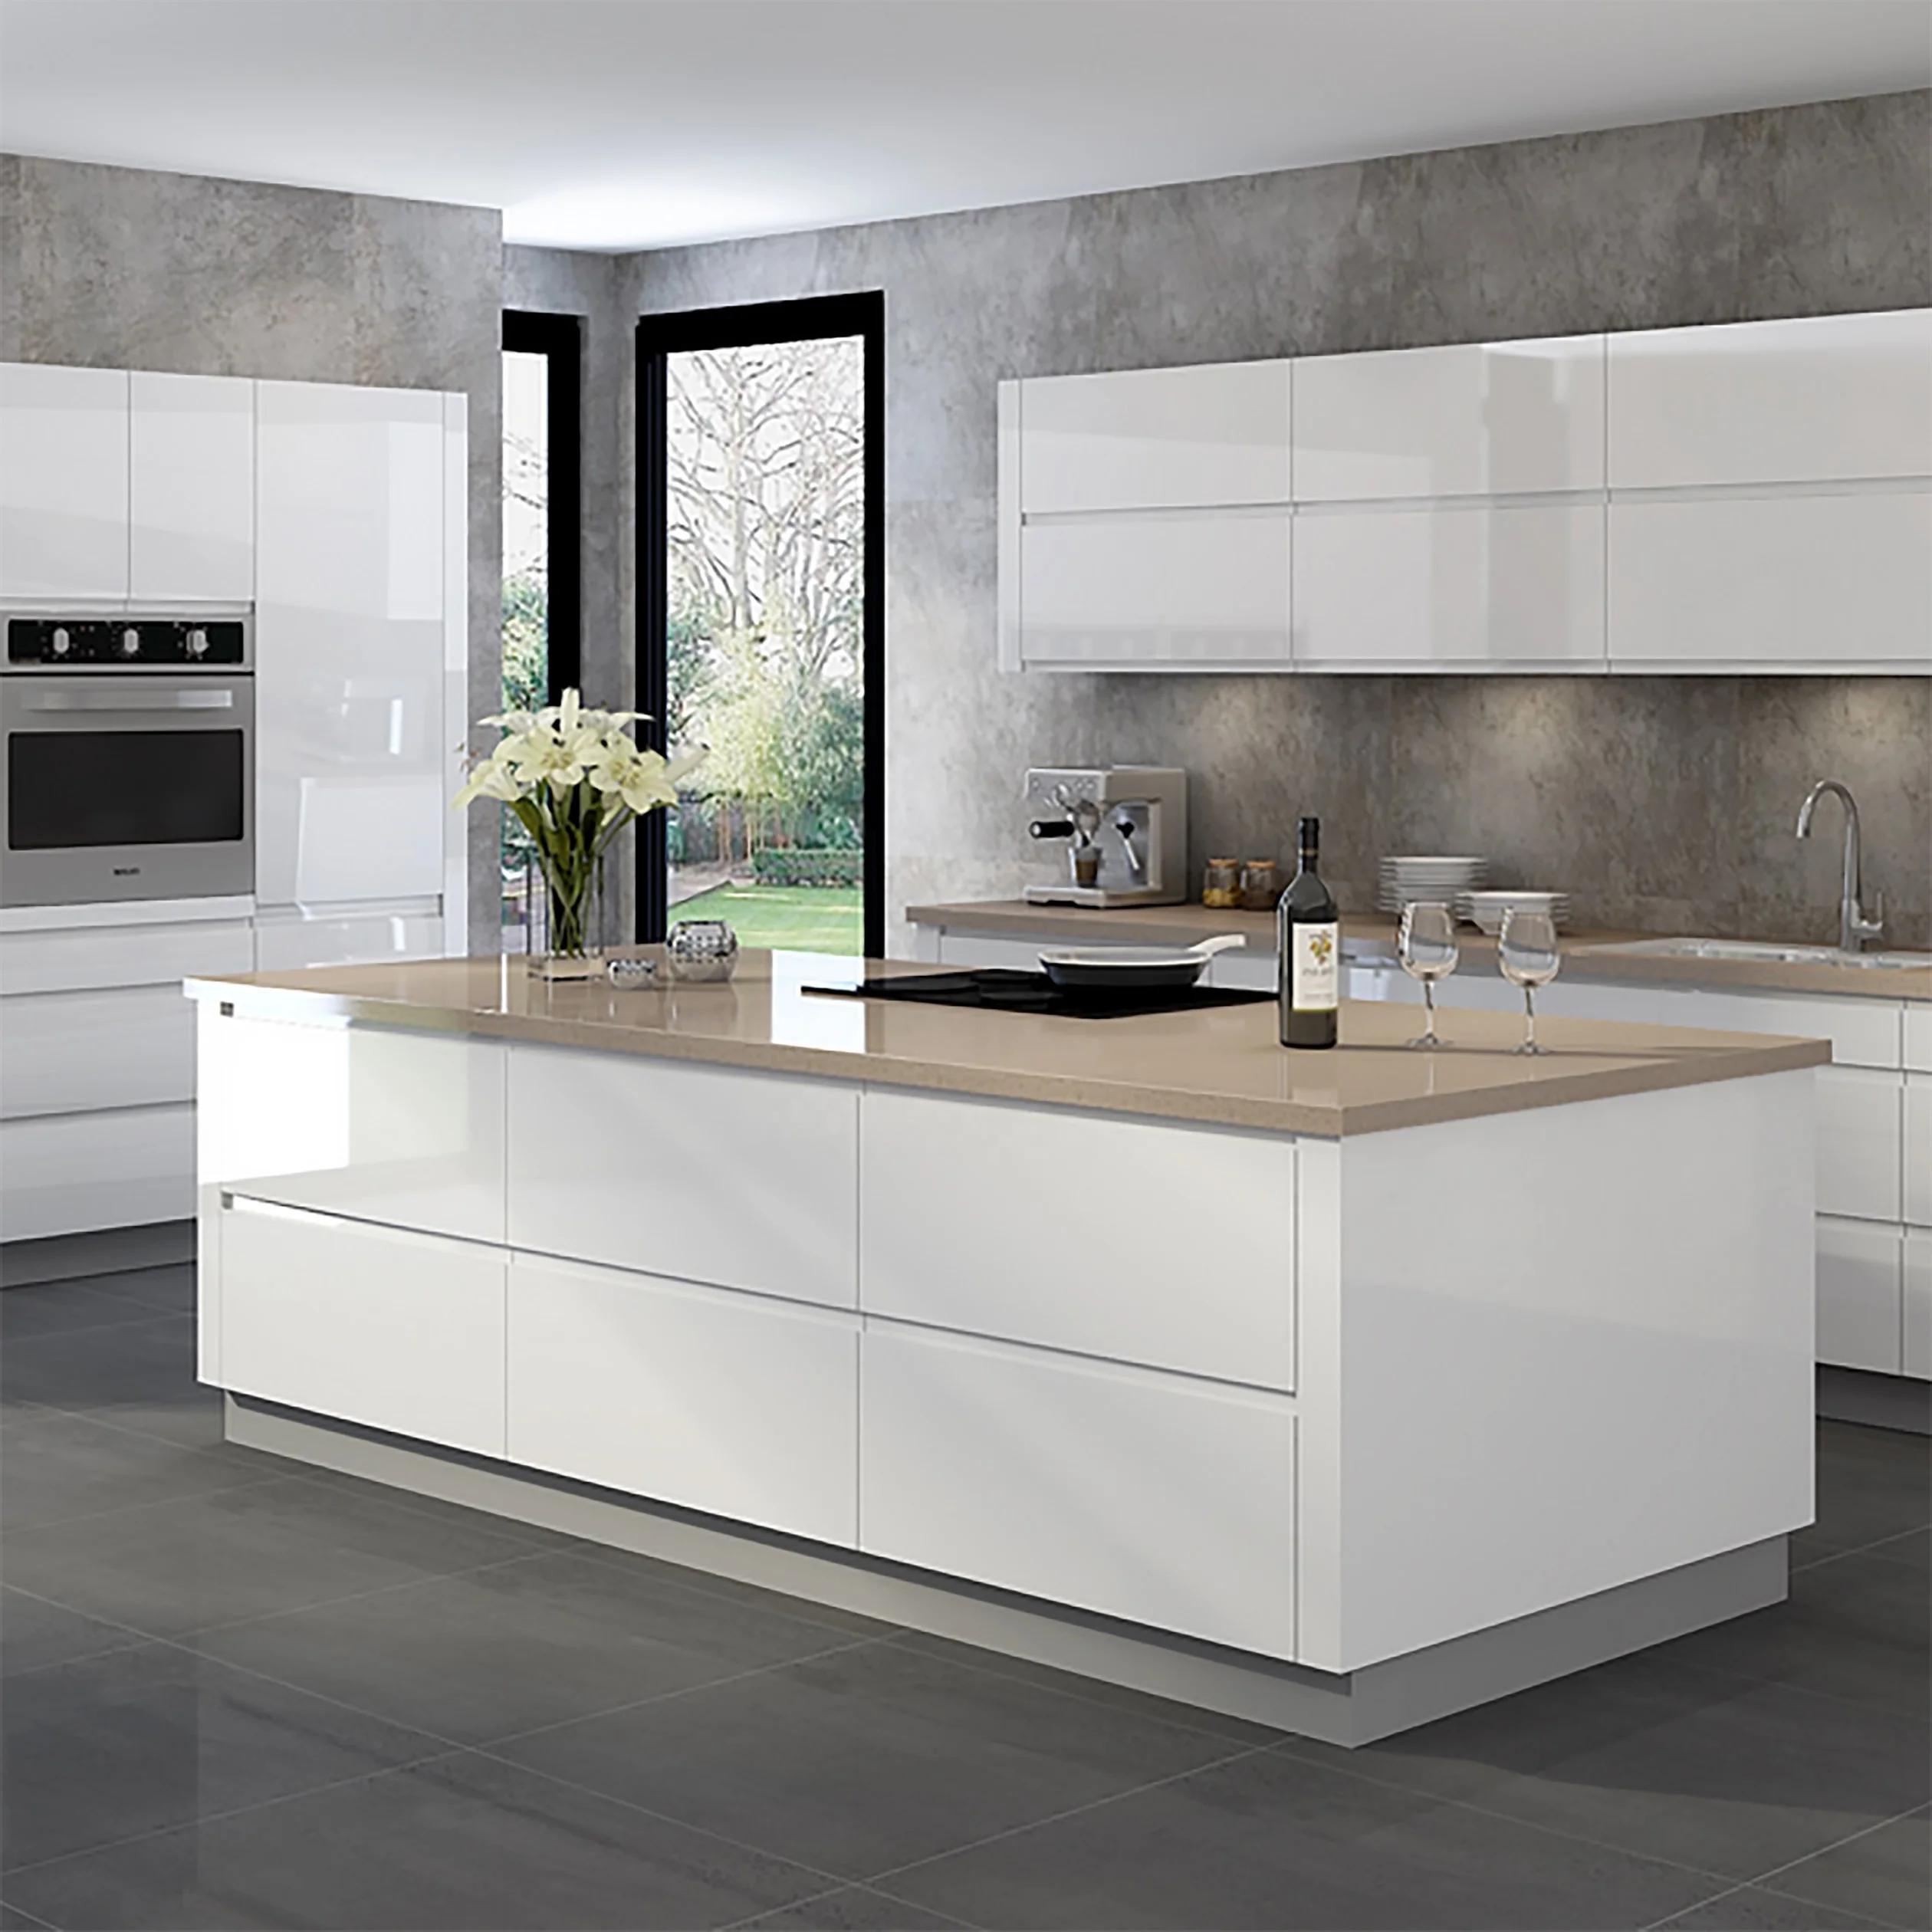 Modern Style Modular Luxury White Lacquer Kitchens Designs - Buy ...